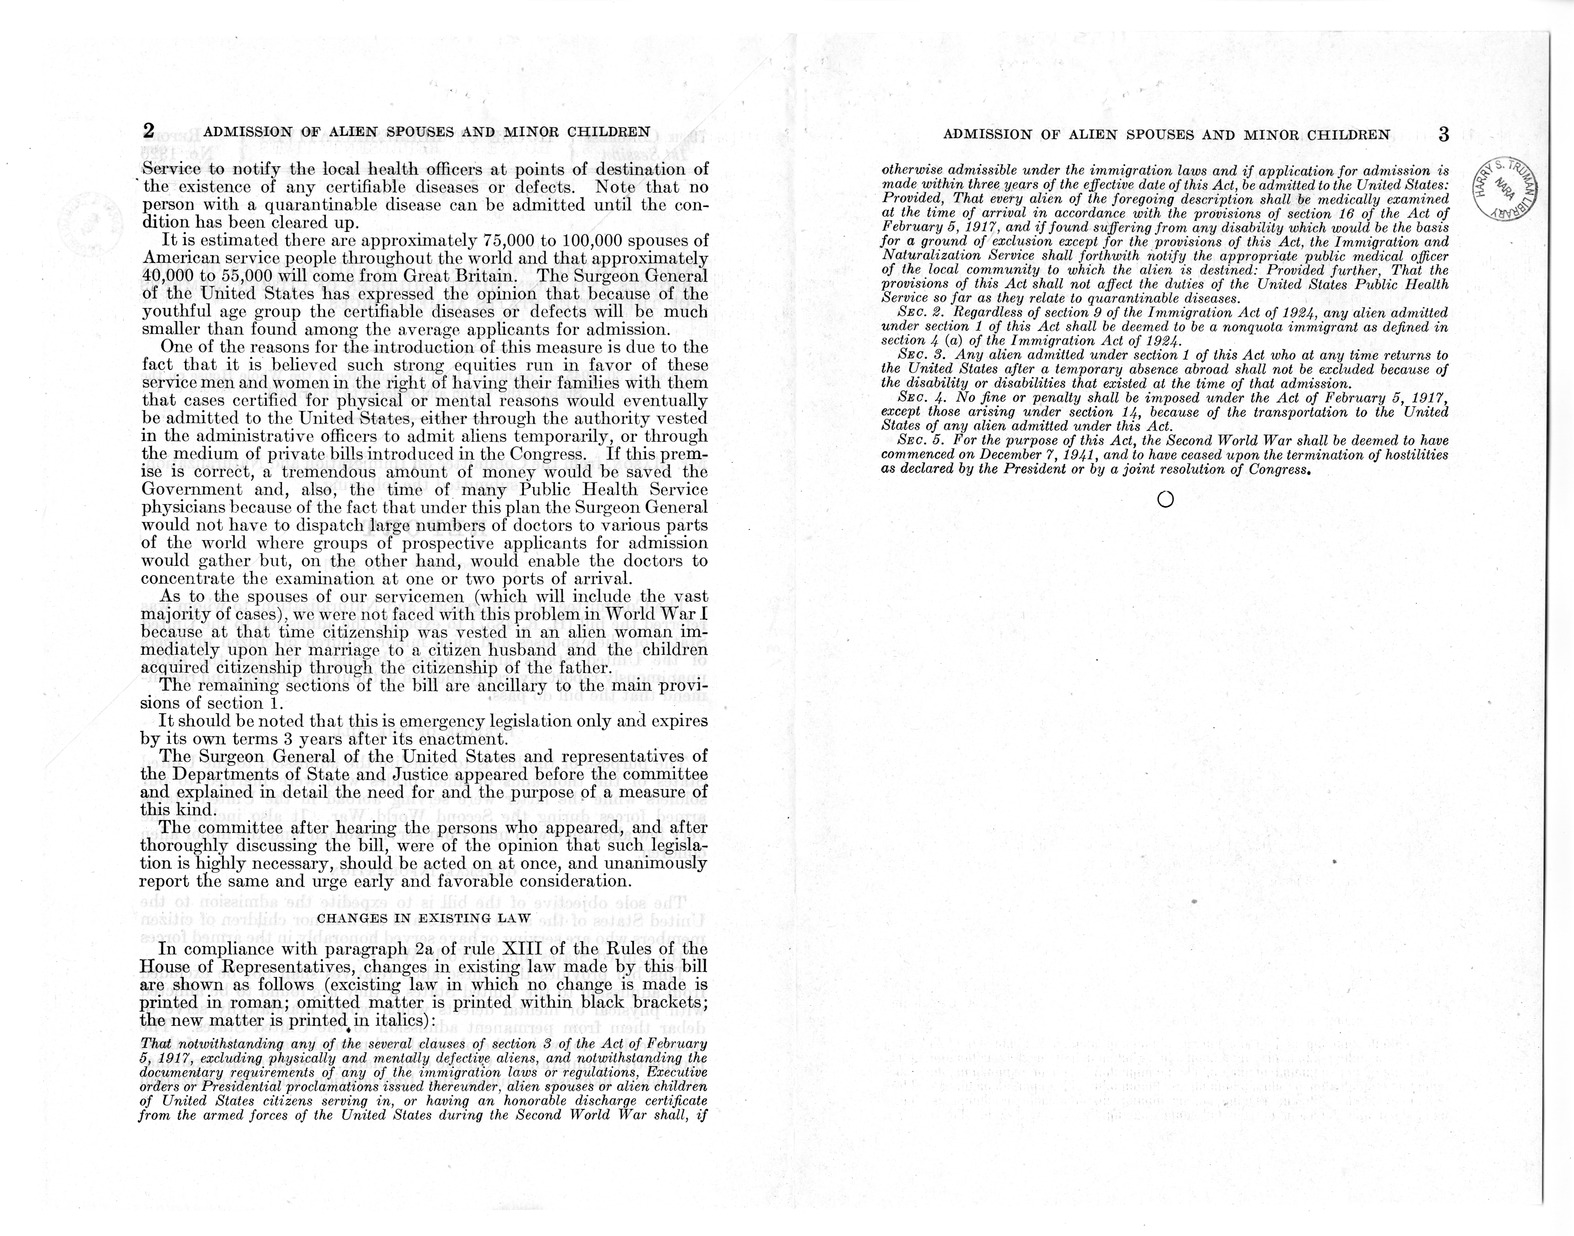 Memorandum from Harold D. Smith to M. C. Latta, H.R. 4857, To Expedite the Admission to the United States of Alien Spouses and Alien Minor Children of Citizen Members of the United States Armed Forces, with Attachments